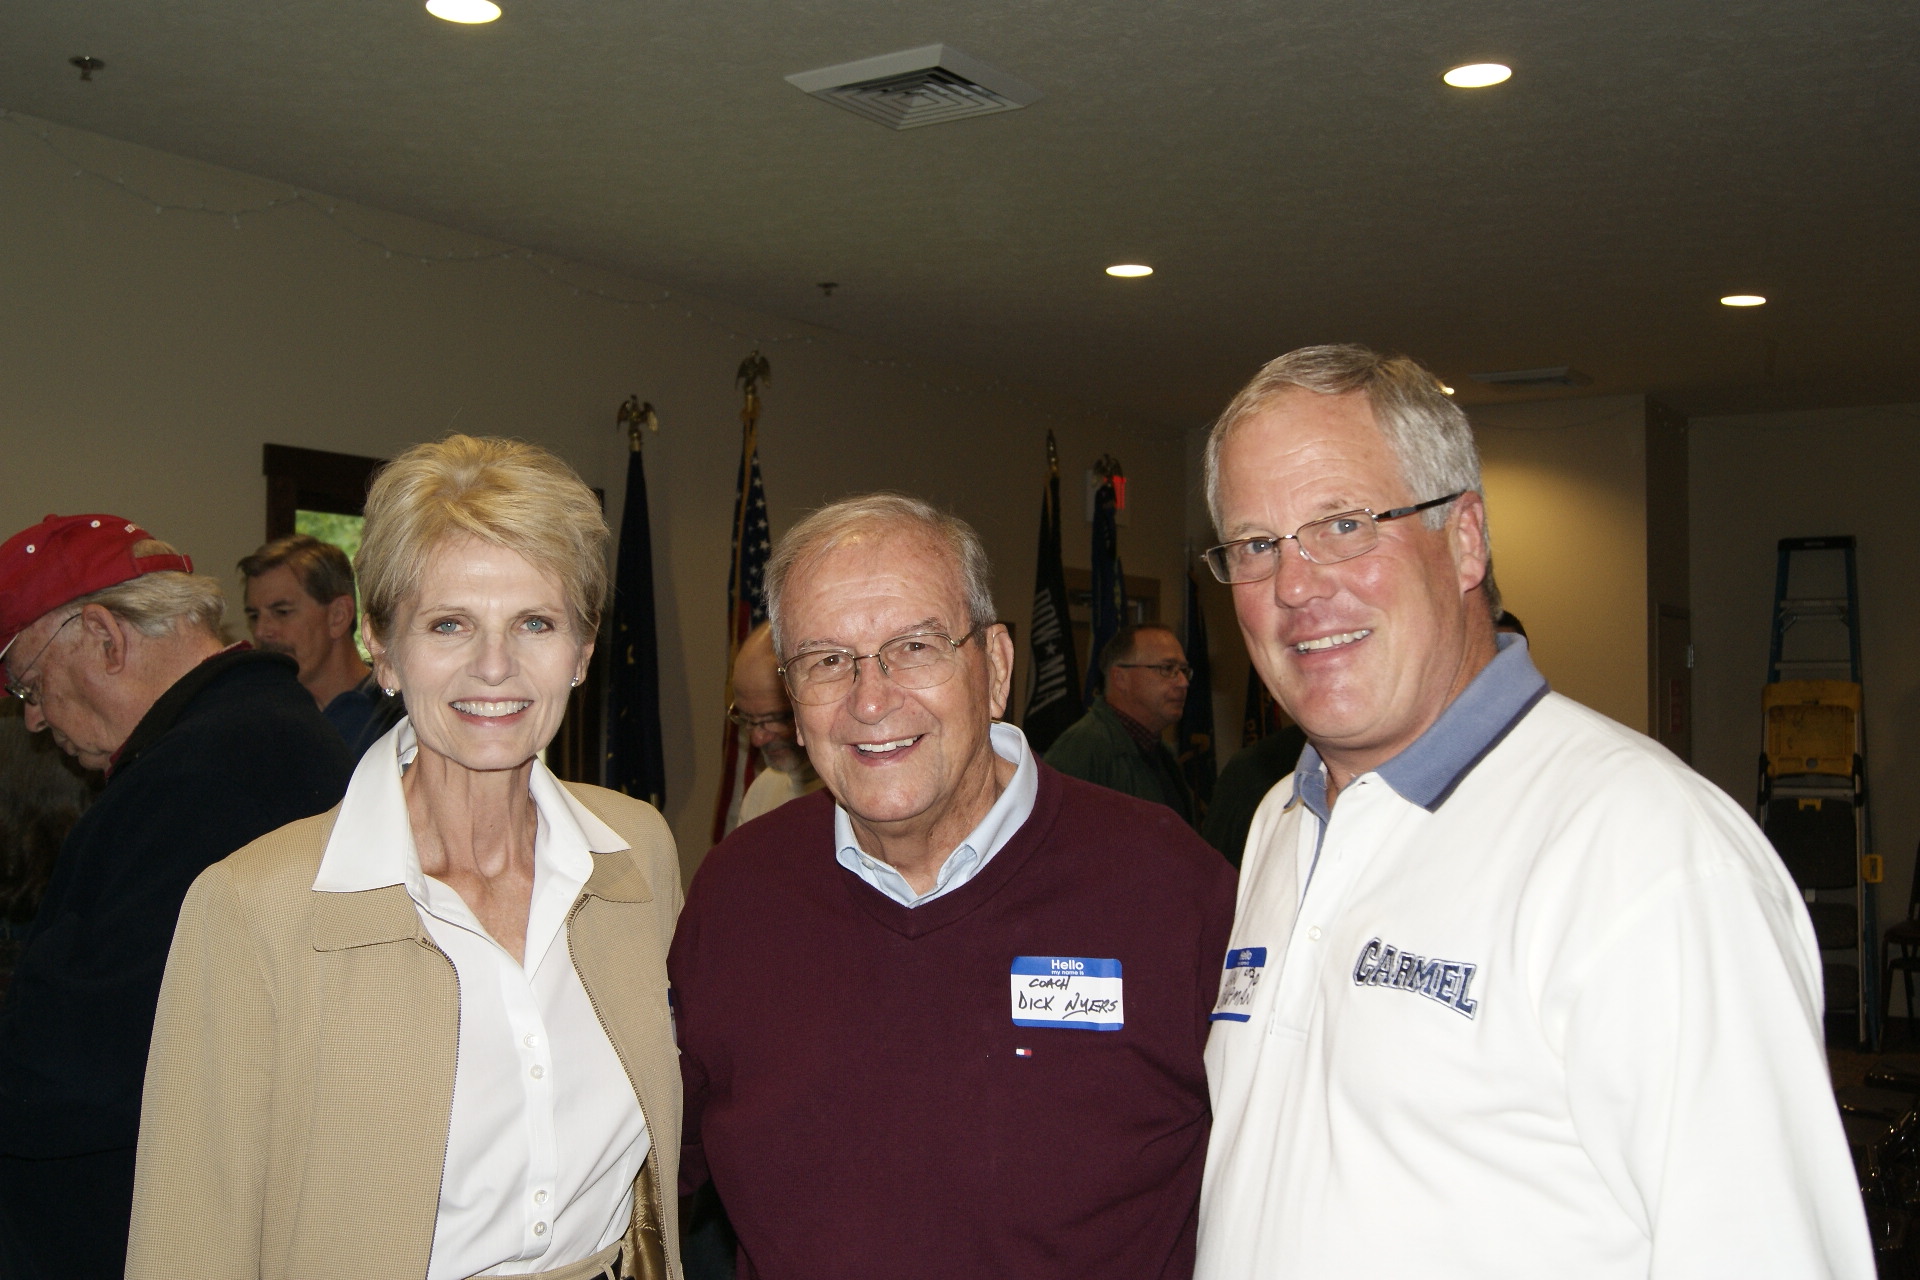 Former Carmel High School football coach Dick Nyers (center) with book authors Pam Otten and Dan Chapman. (Submitted by Michael Easterday)